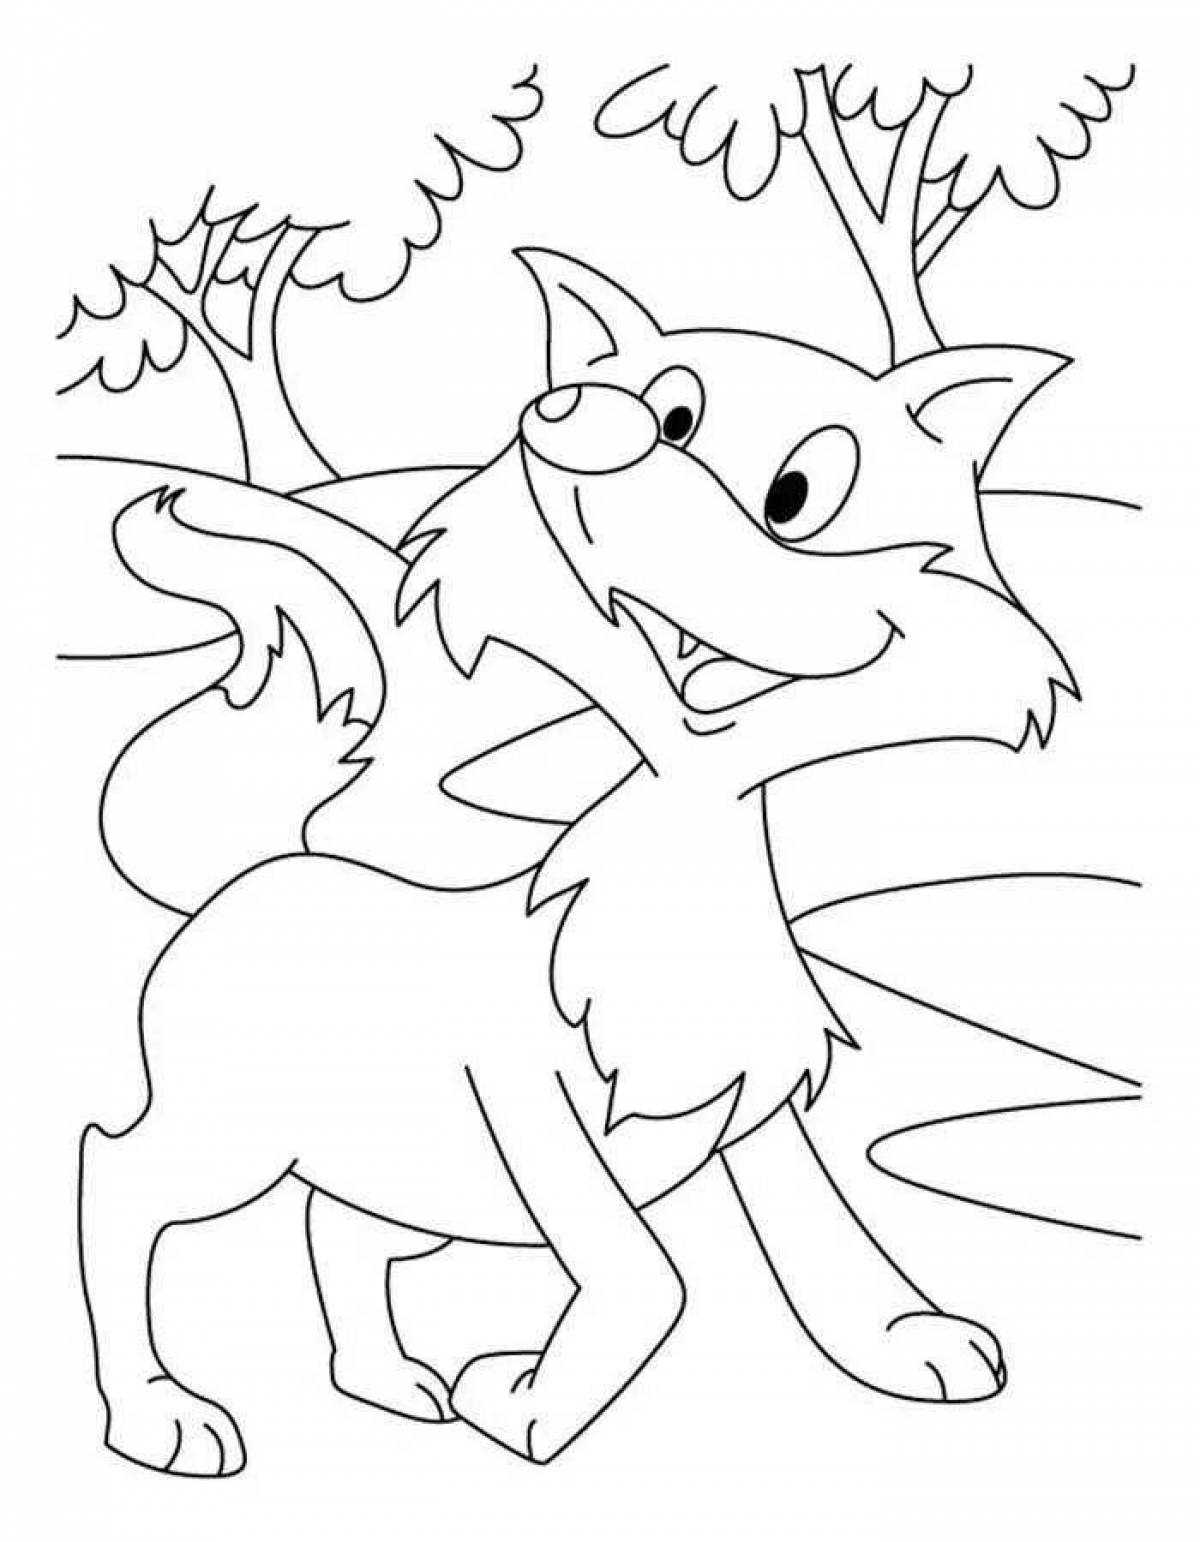 Live crow and fox coloring book